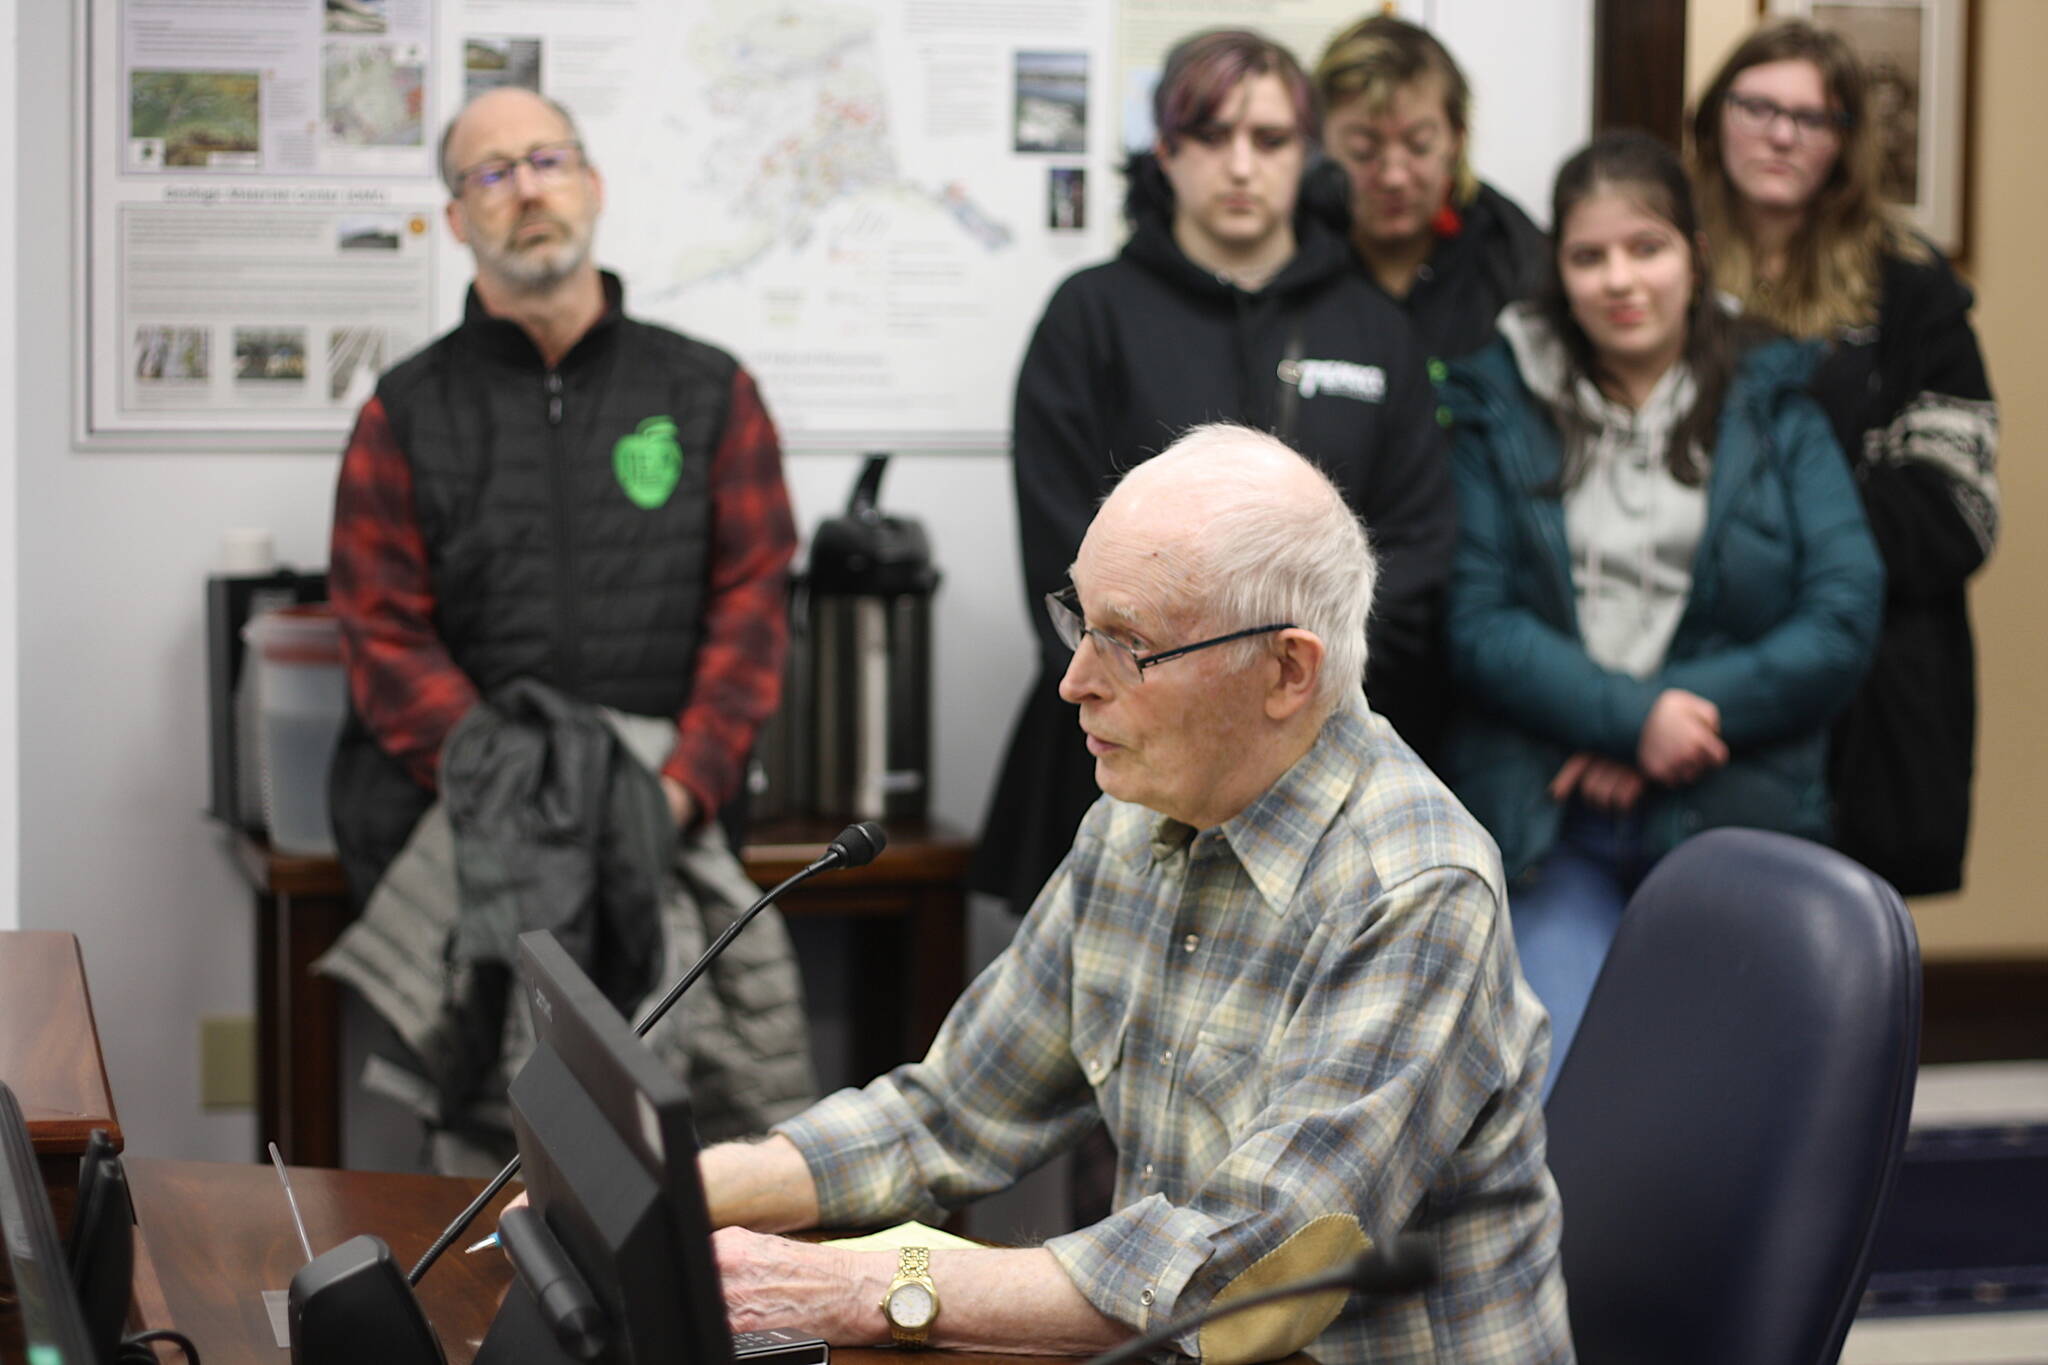 Ron Soherville, a Juneau resident, testifies in favor of a bill restricting sex and gender content in public schools during a House Education Committee meeting Thursday night. He was surrounded by a crowd of mostly students who testified against the bill. (Mark Sabbatini / Juneau Empire)